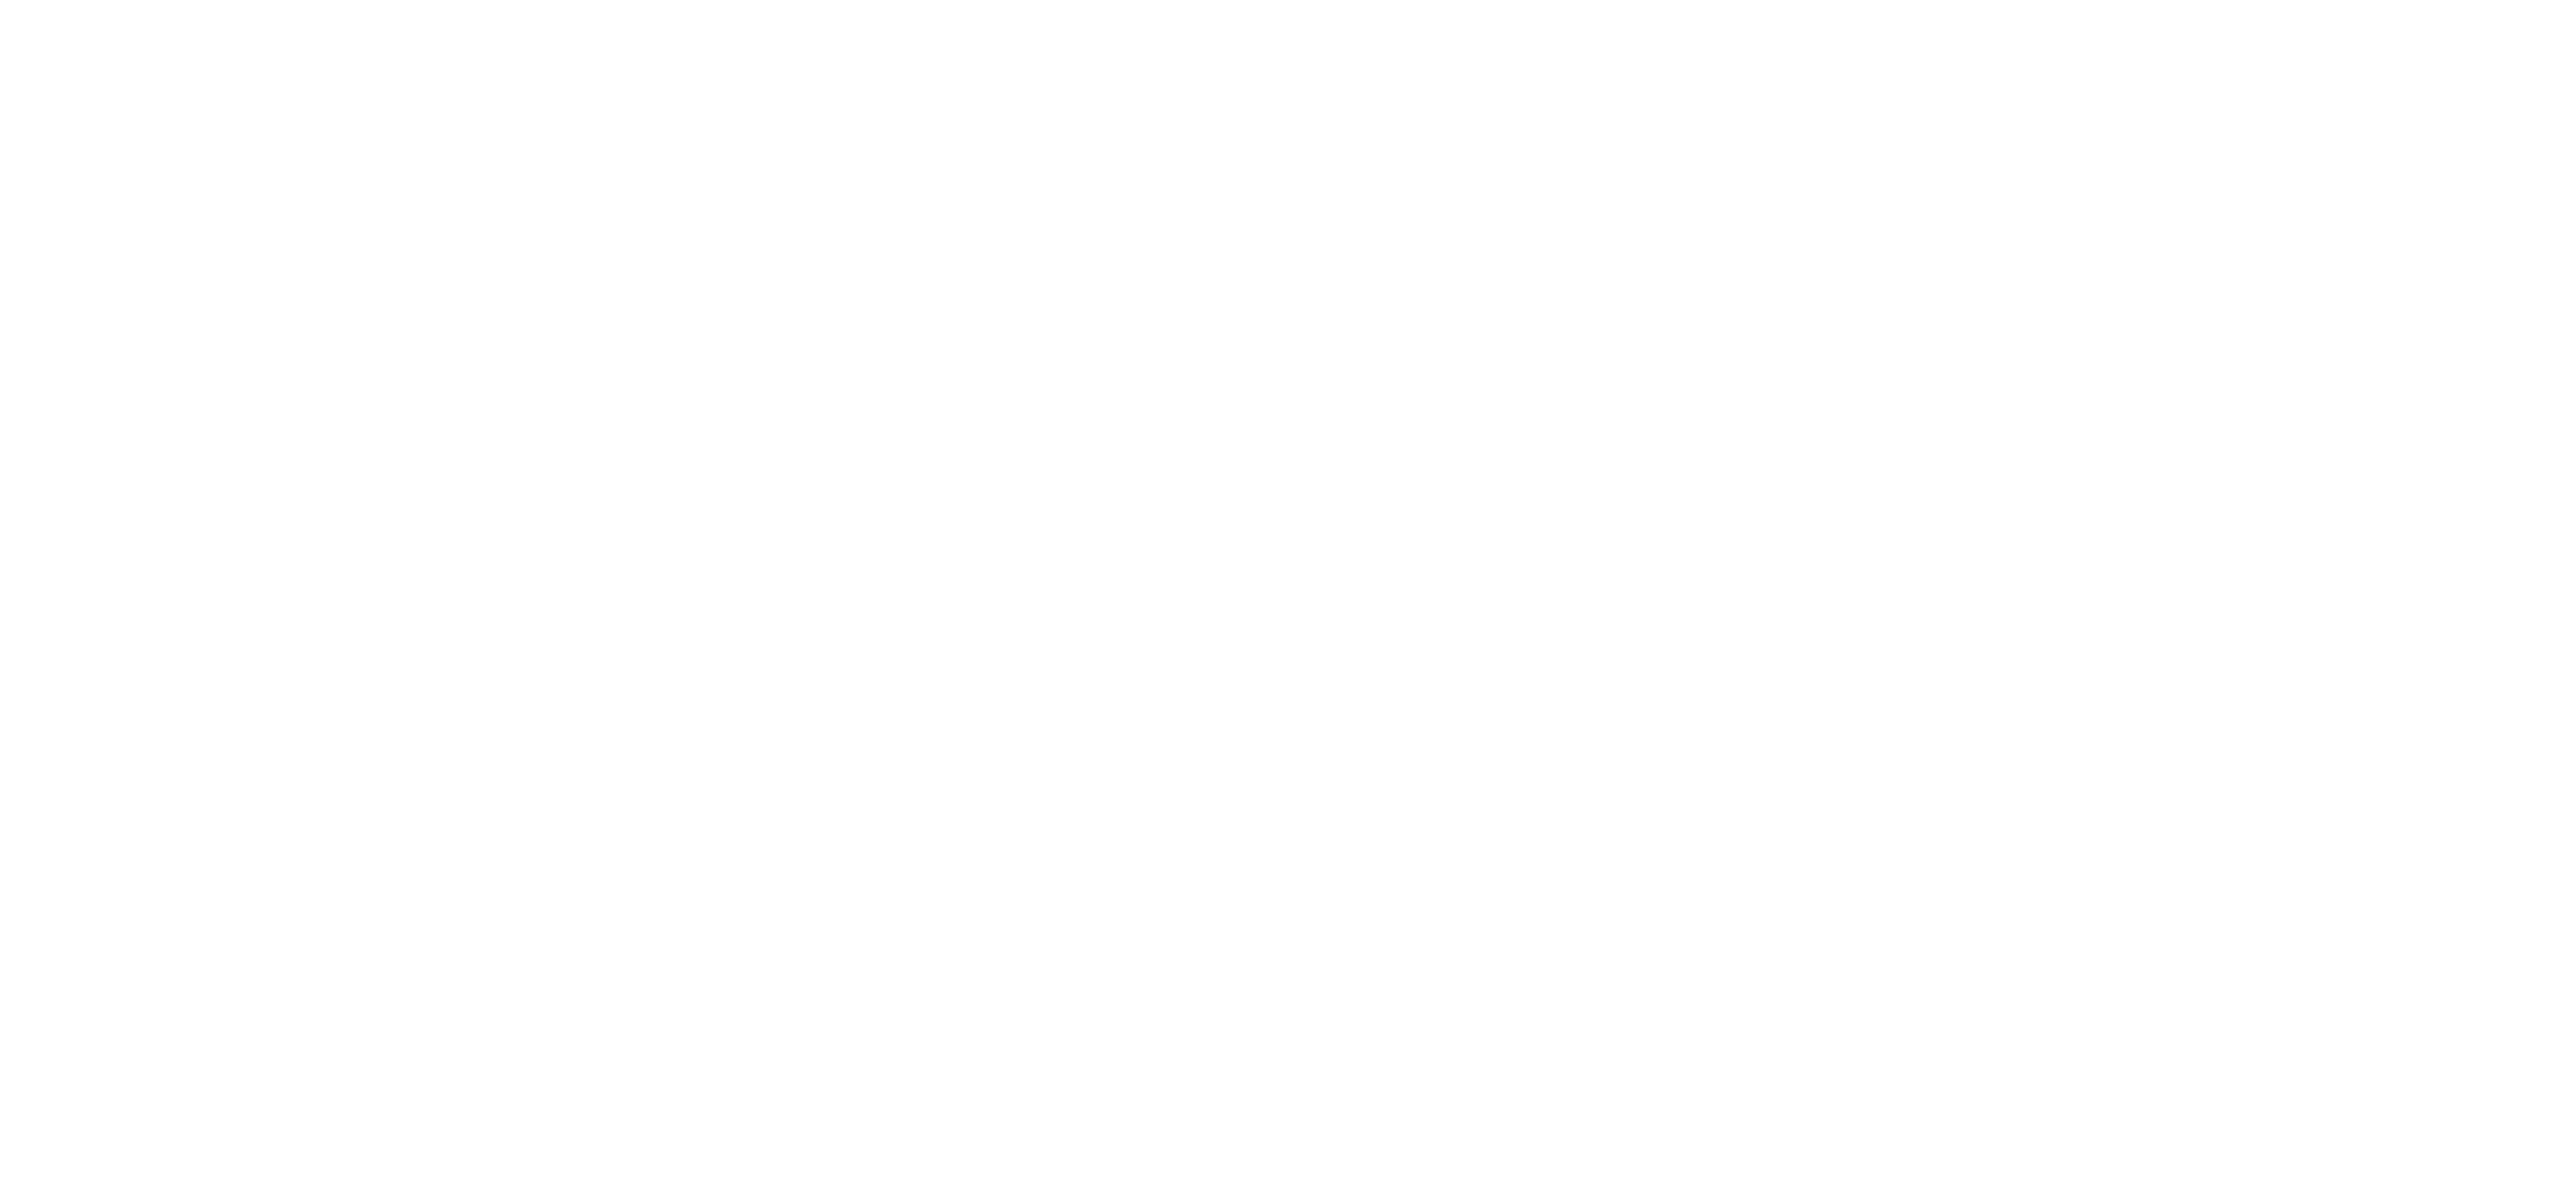 Global Equity Infrastructures Corporation